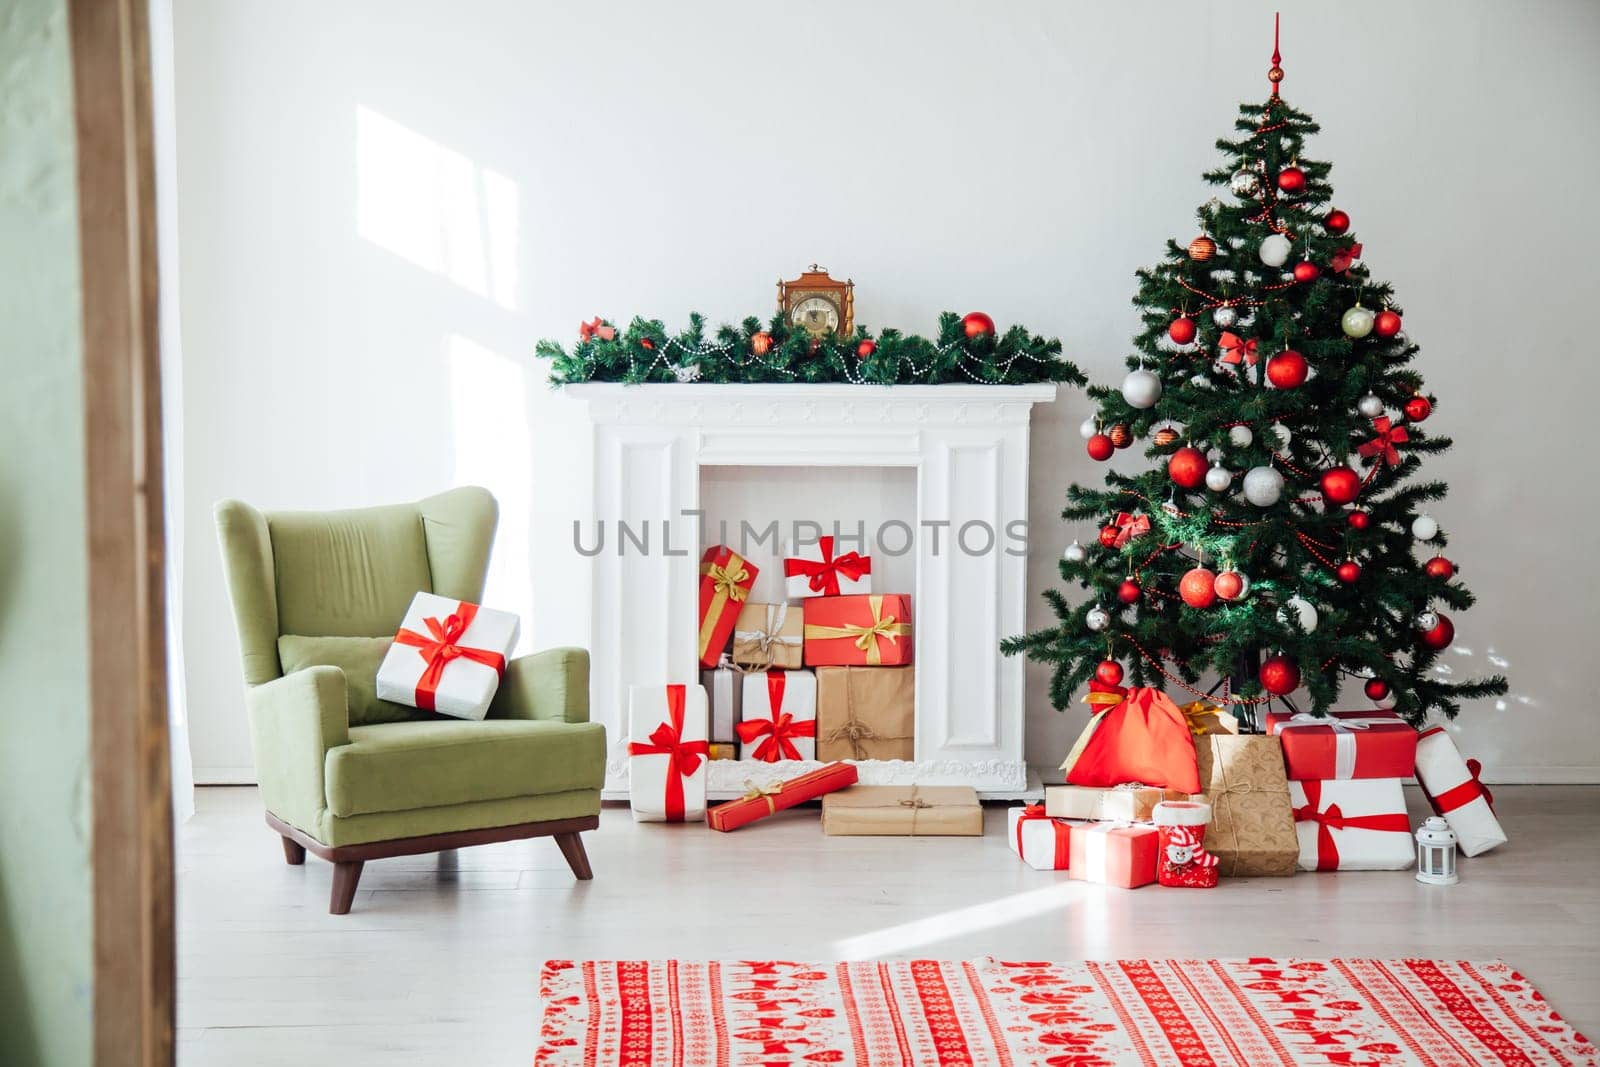 Christmas home interior Christmas tree red gifts new year decor background